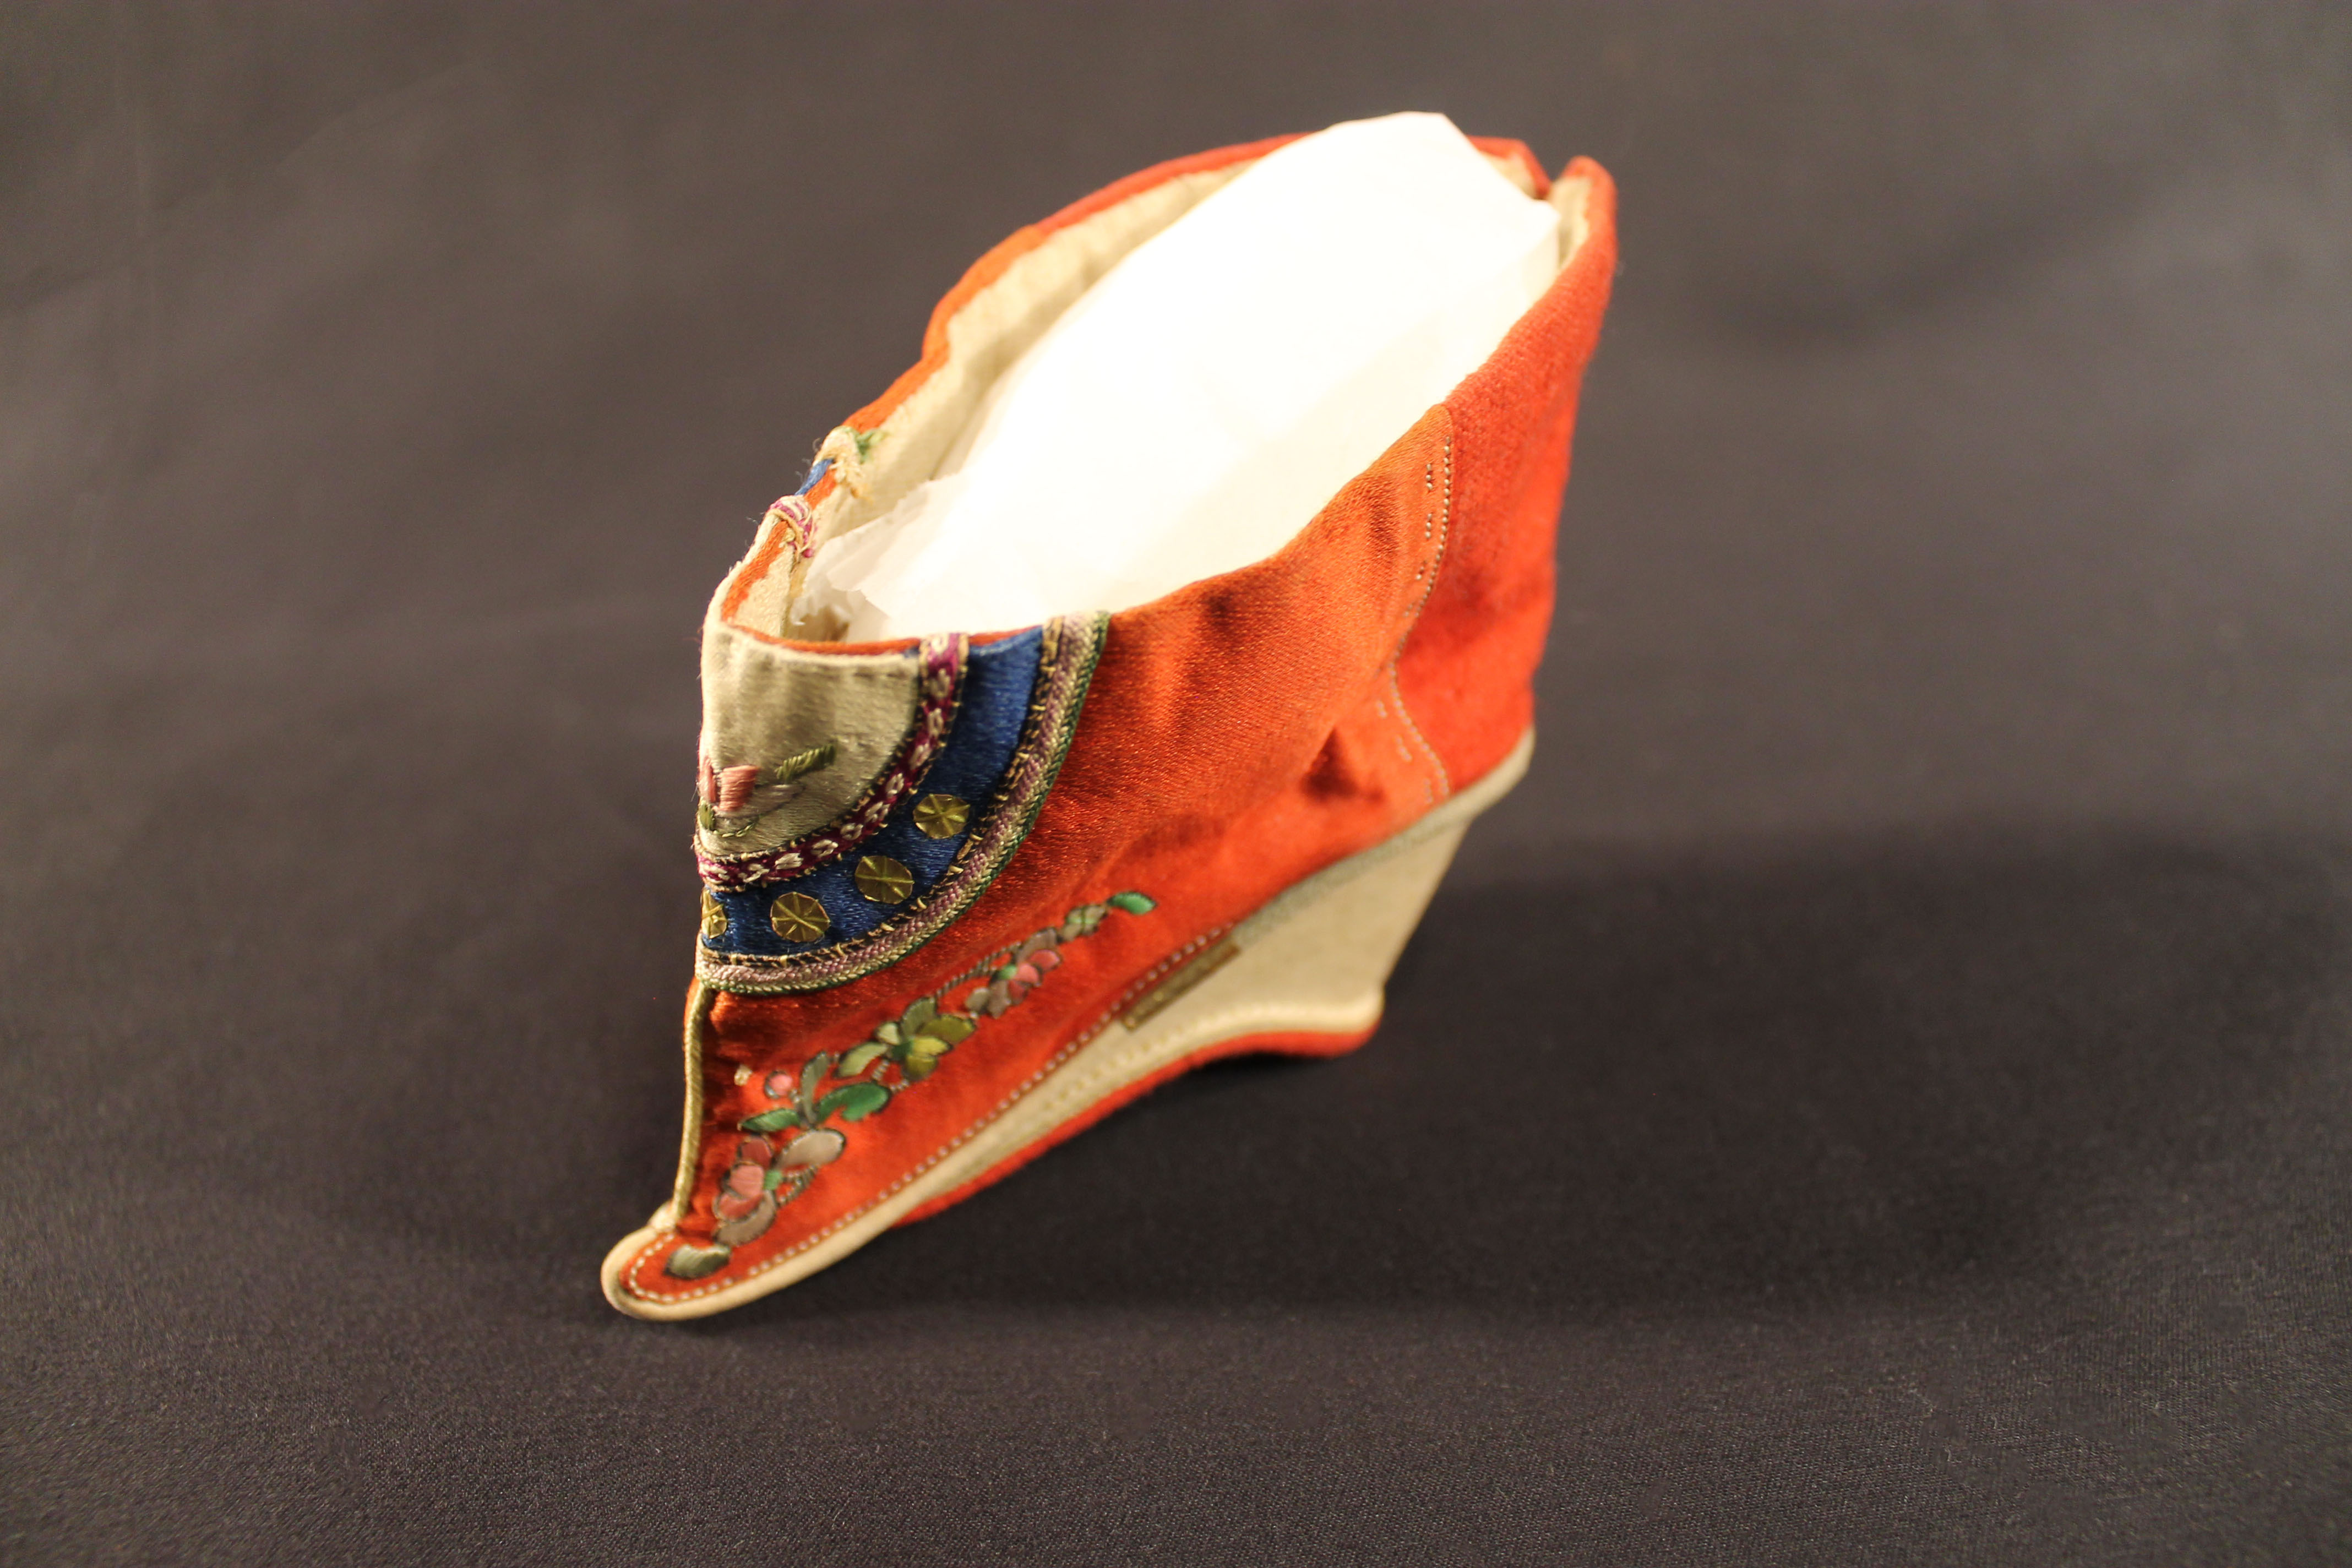 Small shoe with a white base that curves upwards and has a large opening up top. The shoe is primarily red, with flowers and a mandala design on the front.